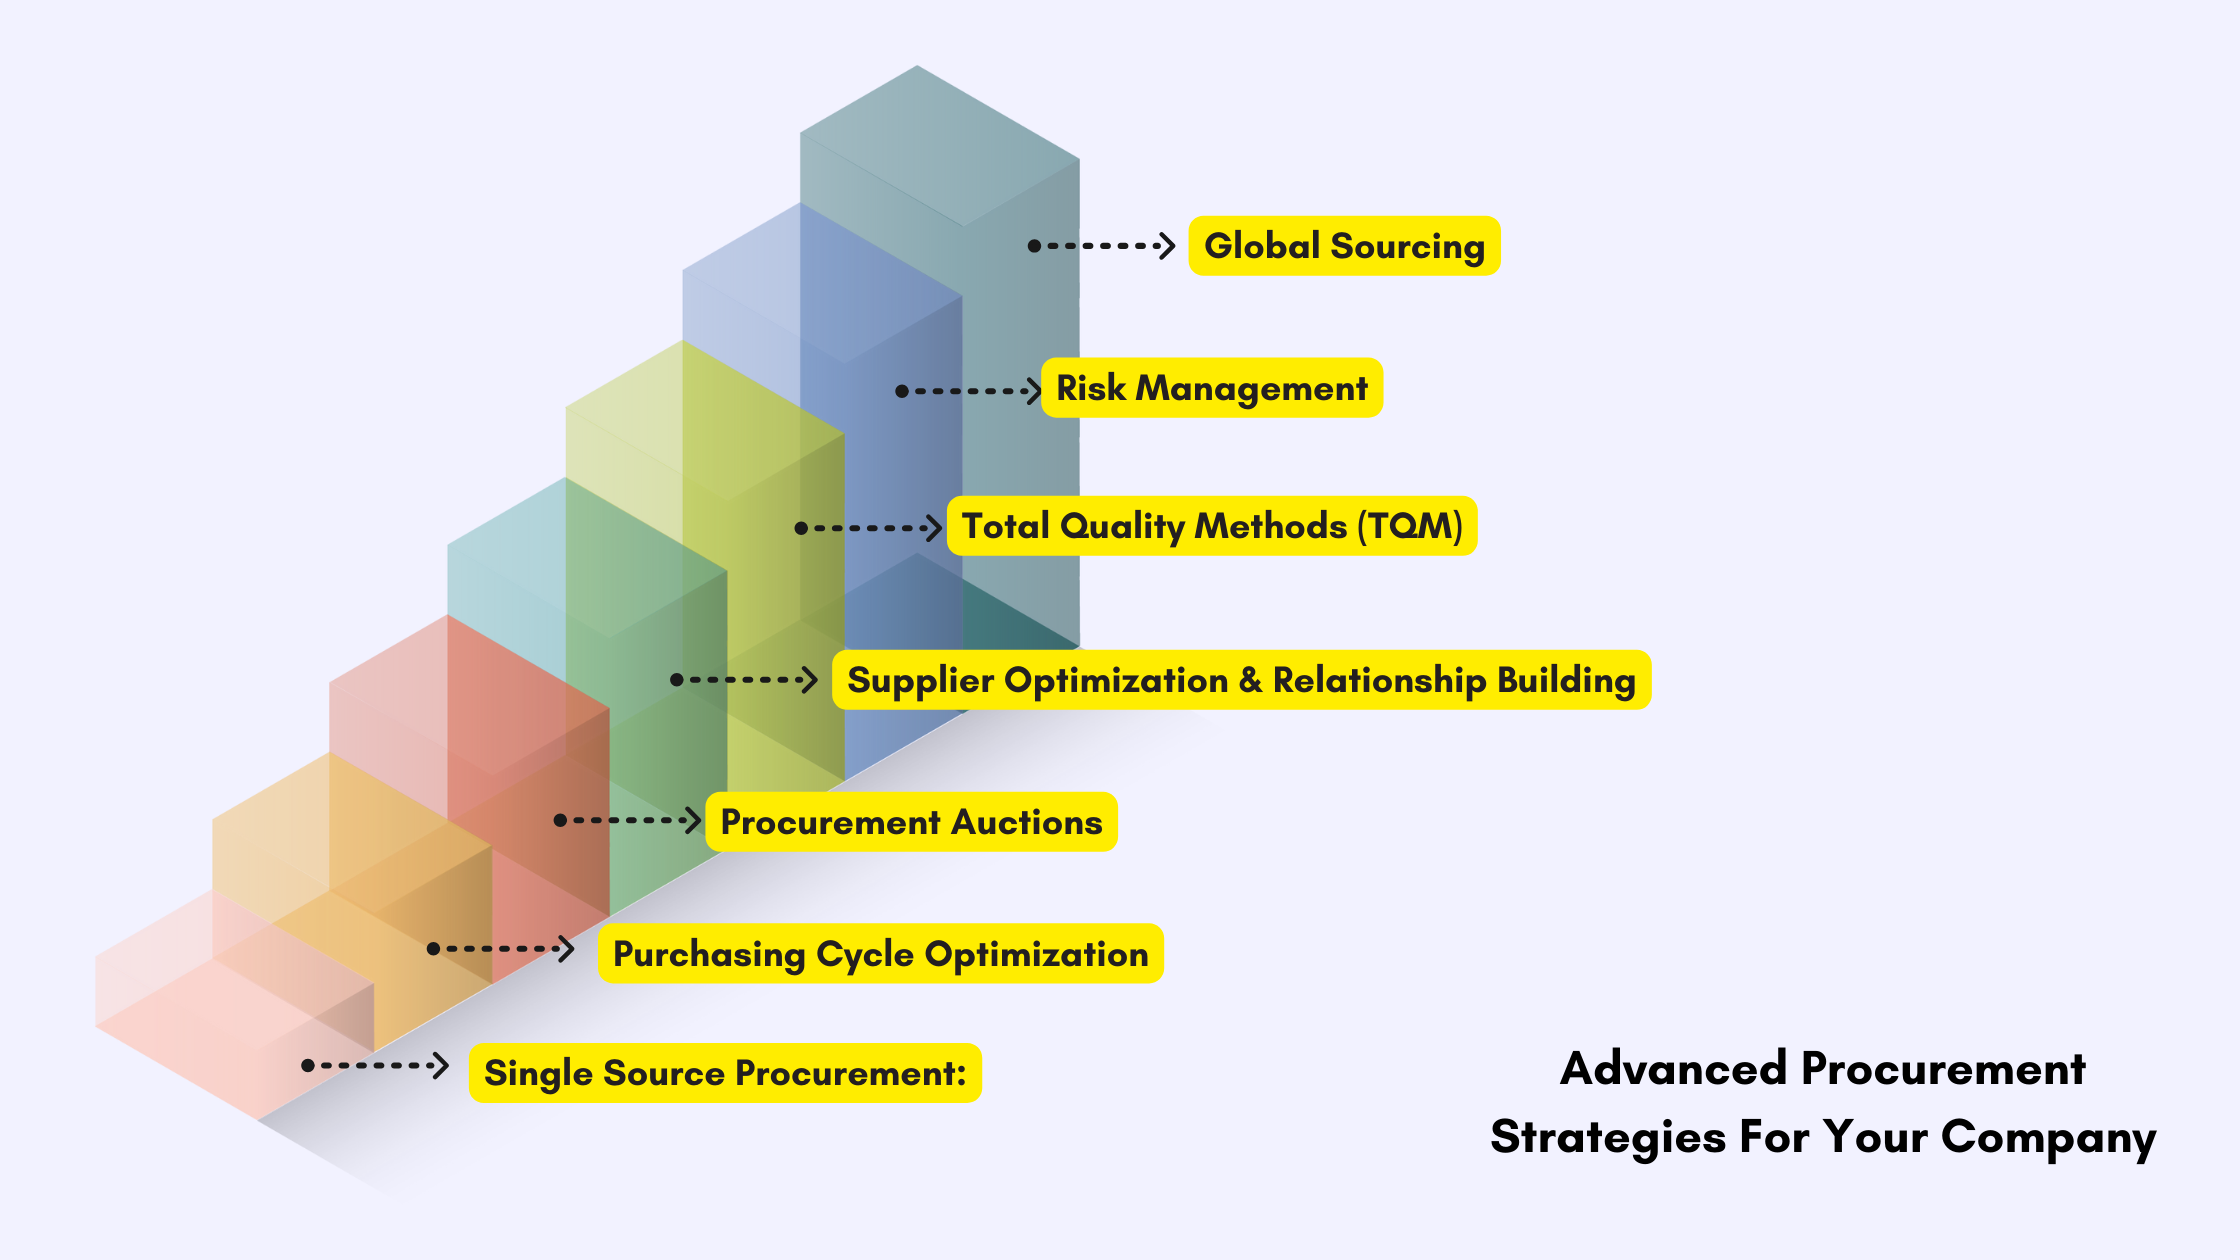 Advanced procurement strategies for your company